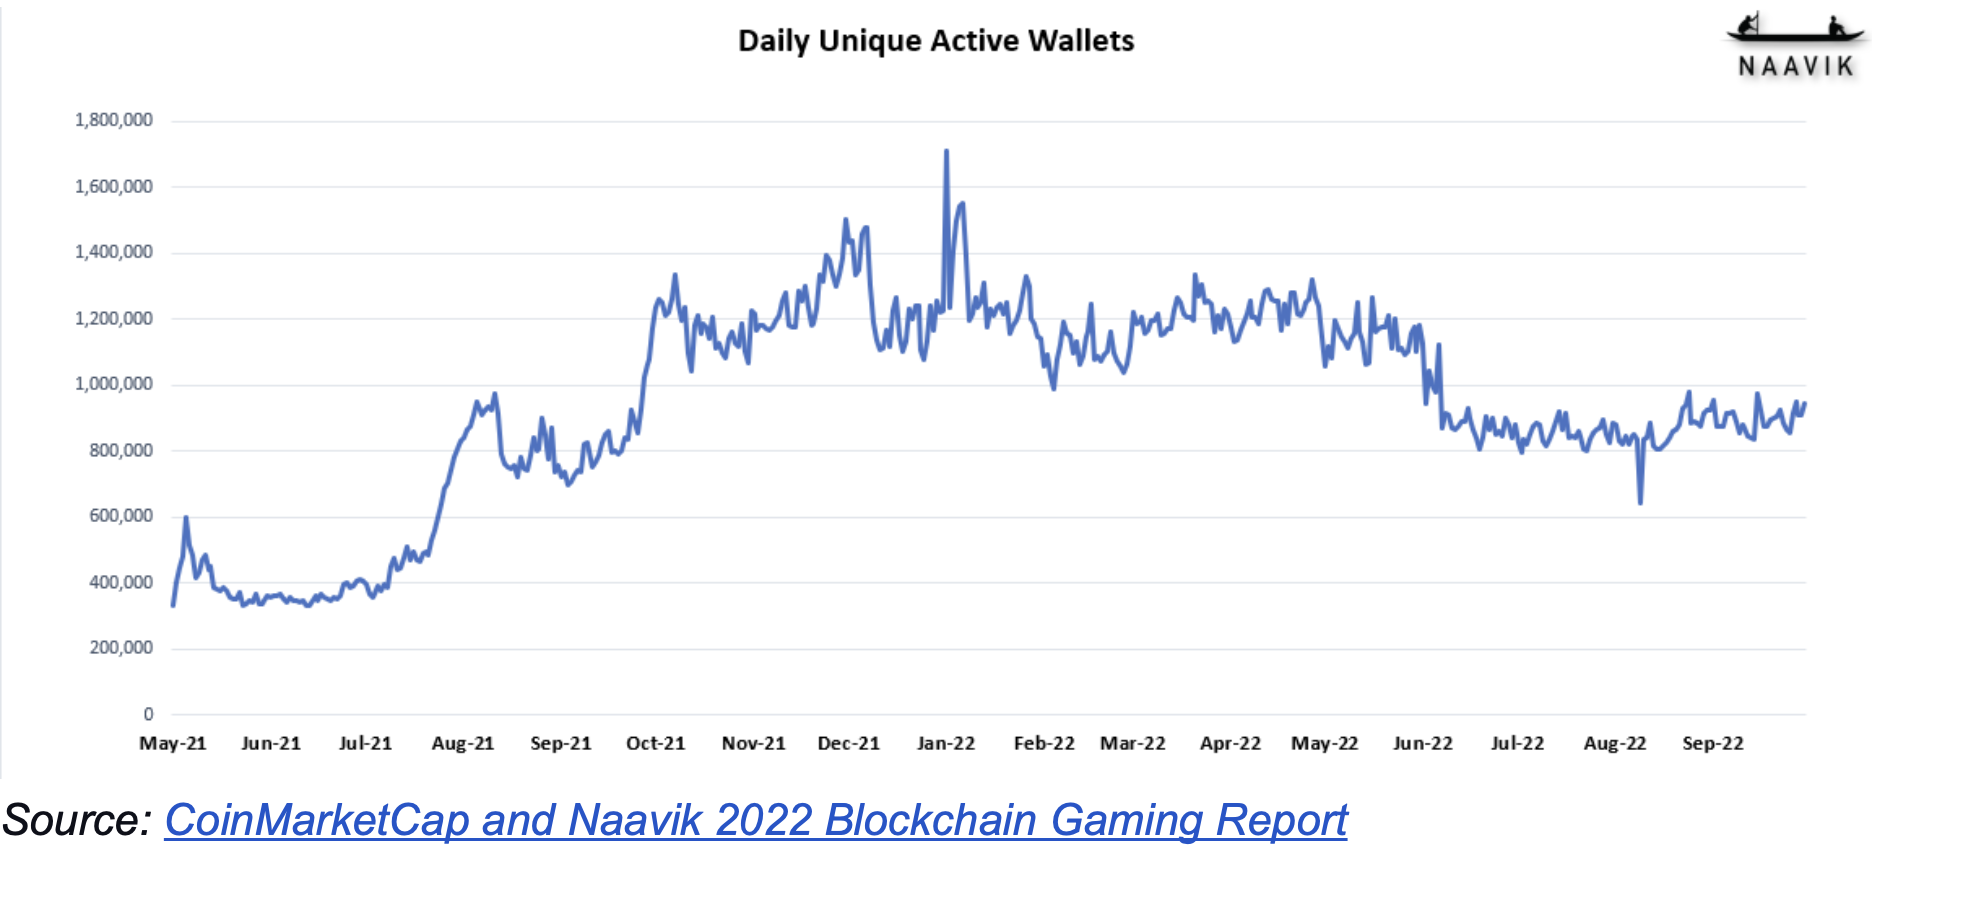 While the long-term trend shows a gradual and non-linear increase in participation, the current trend is one of stagnation. blockchain gaming